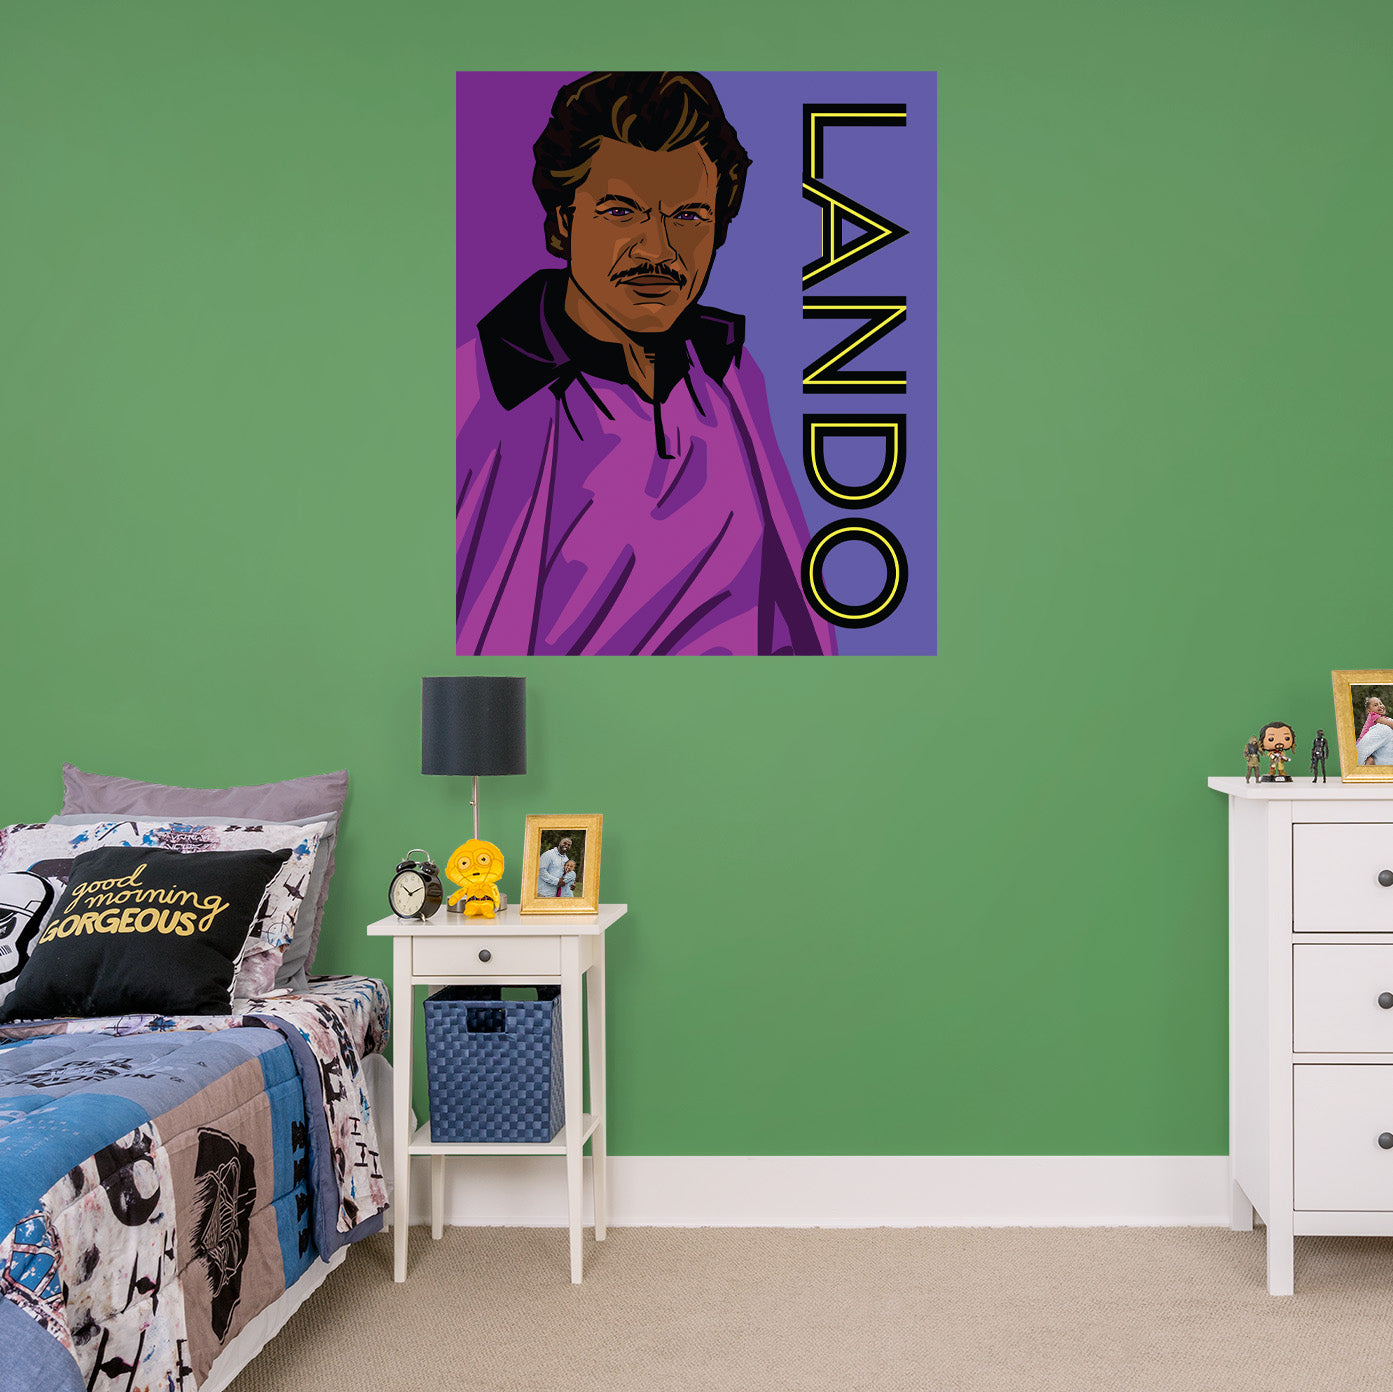 Lando Calrissian LANDO Pop Art Poster - Officially Licensed Star Wars Removable Adhesive Decal